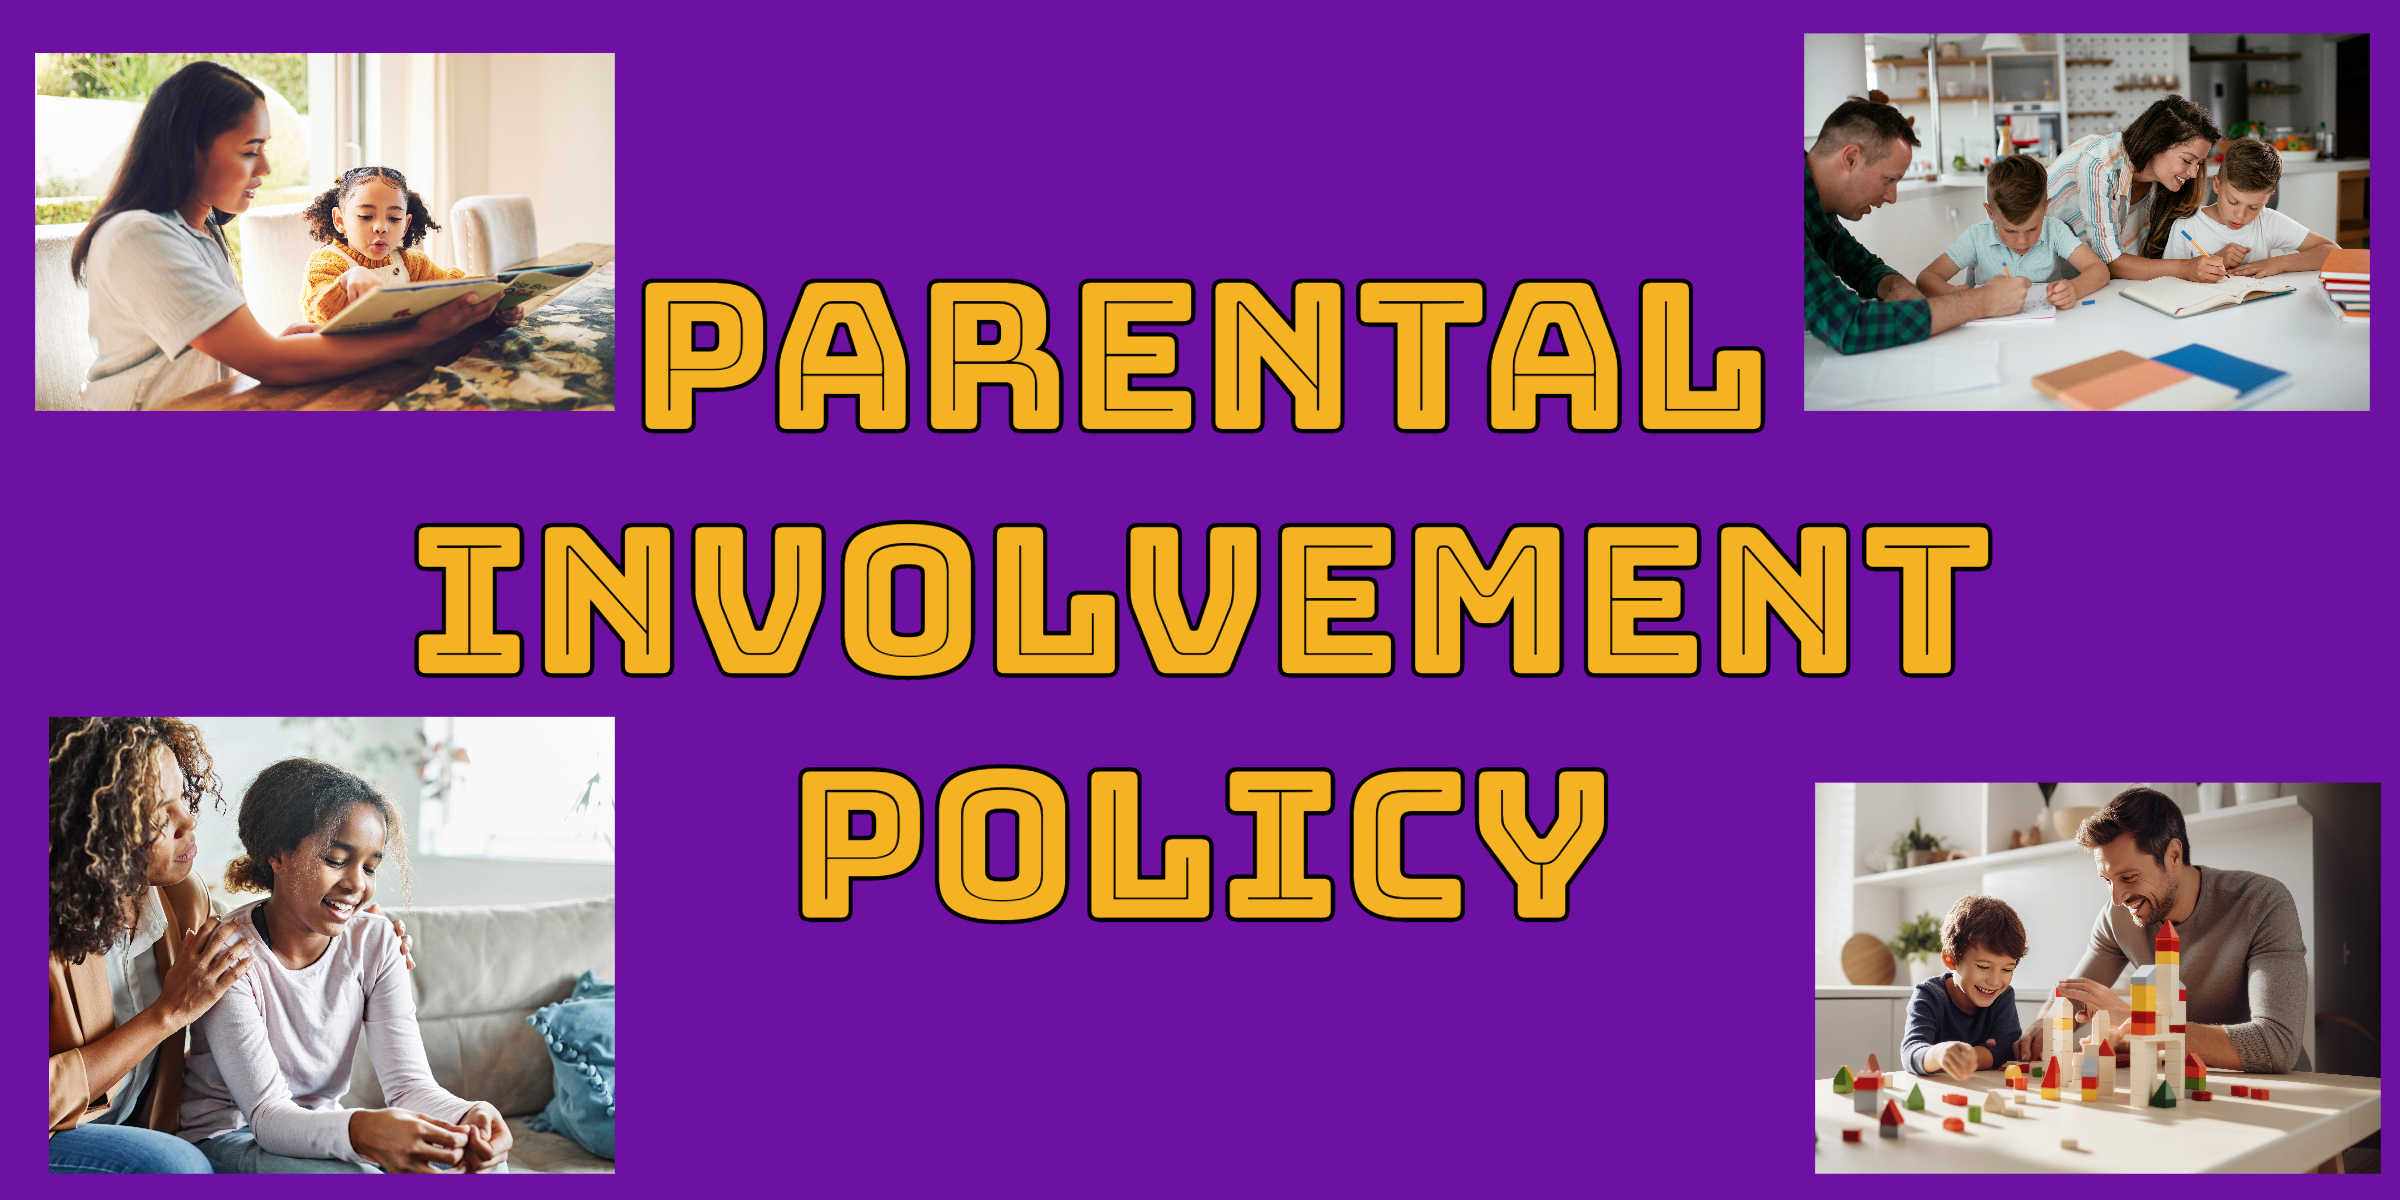 4 photos of parents interacting with children, reading books, doing homework, talking, and building with blocks are in each corner. Words in the middle read: "Parental involvement Policy"